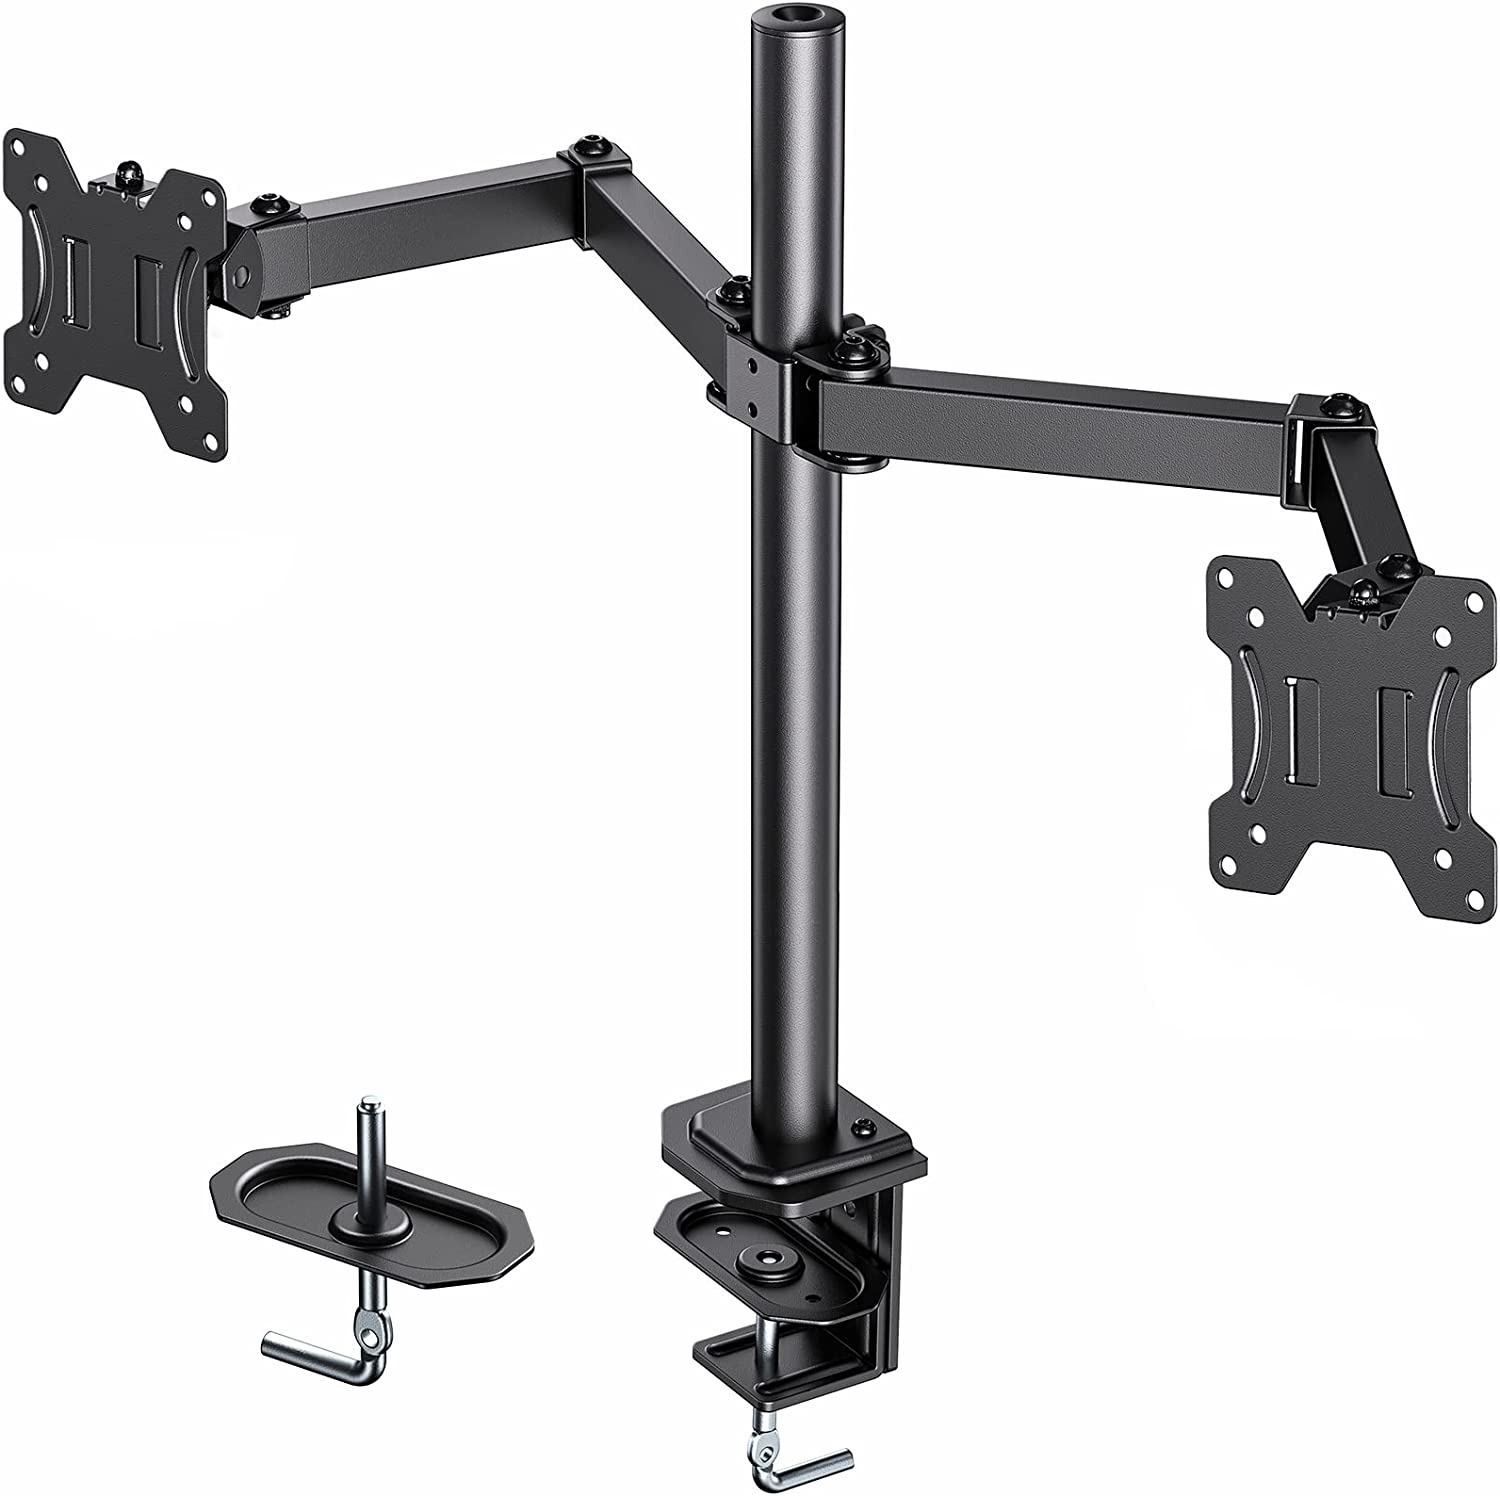 Huanuo Dual VESA Mount Adjustable Tilt Monitor Stand w/ C Clamp & Base (13" - 27" Monitors) $17.40 + Free Shipping